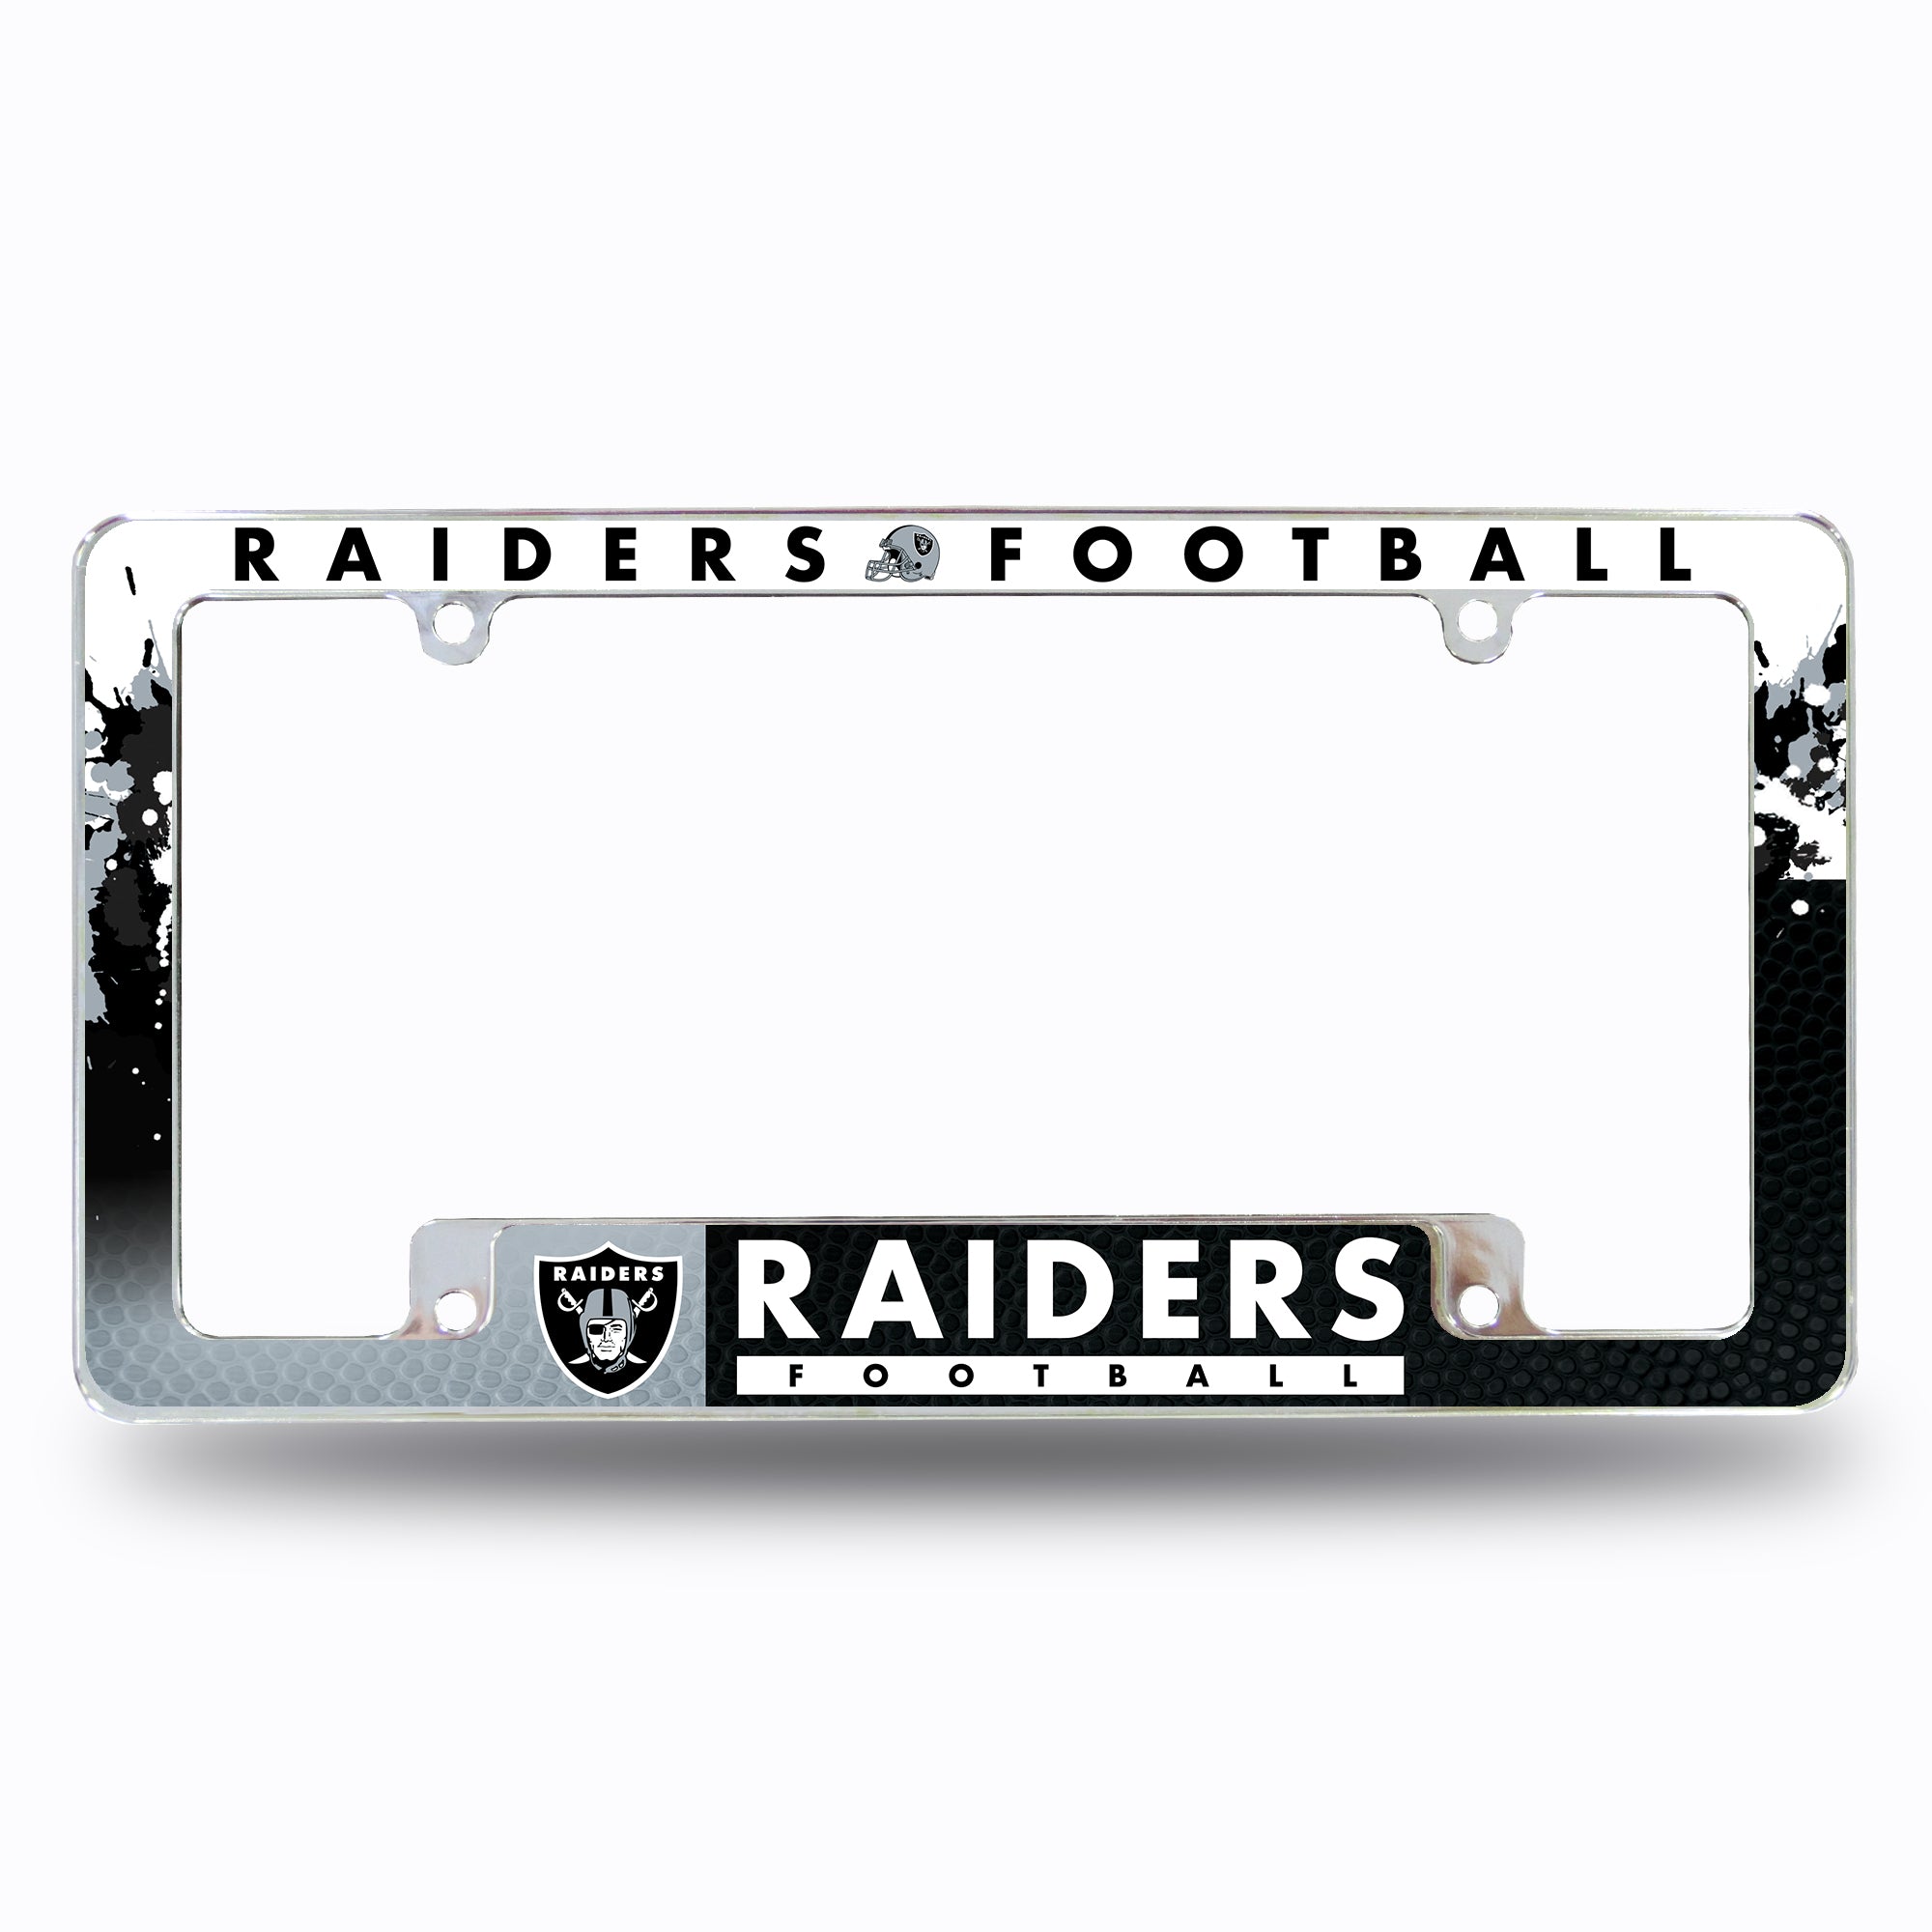 Rico Industries Las Vegas Football 12 inch x 6 inch Chrome Hash Tag All Over Automotive License Plate Frame for Car/truck/suv, Other